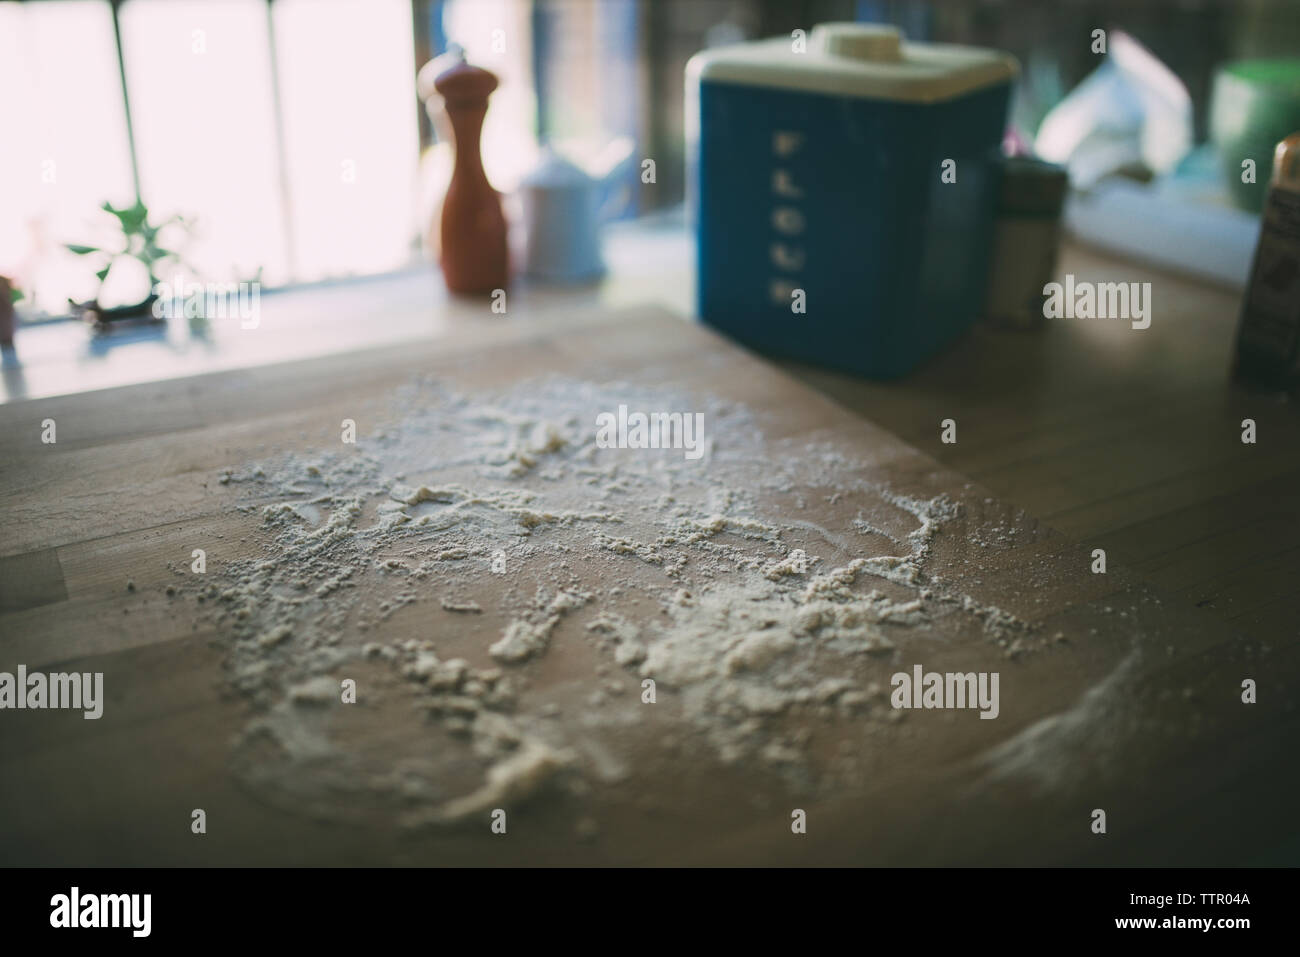 High angle view of flour spilled on table Stock Photo